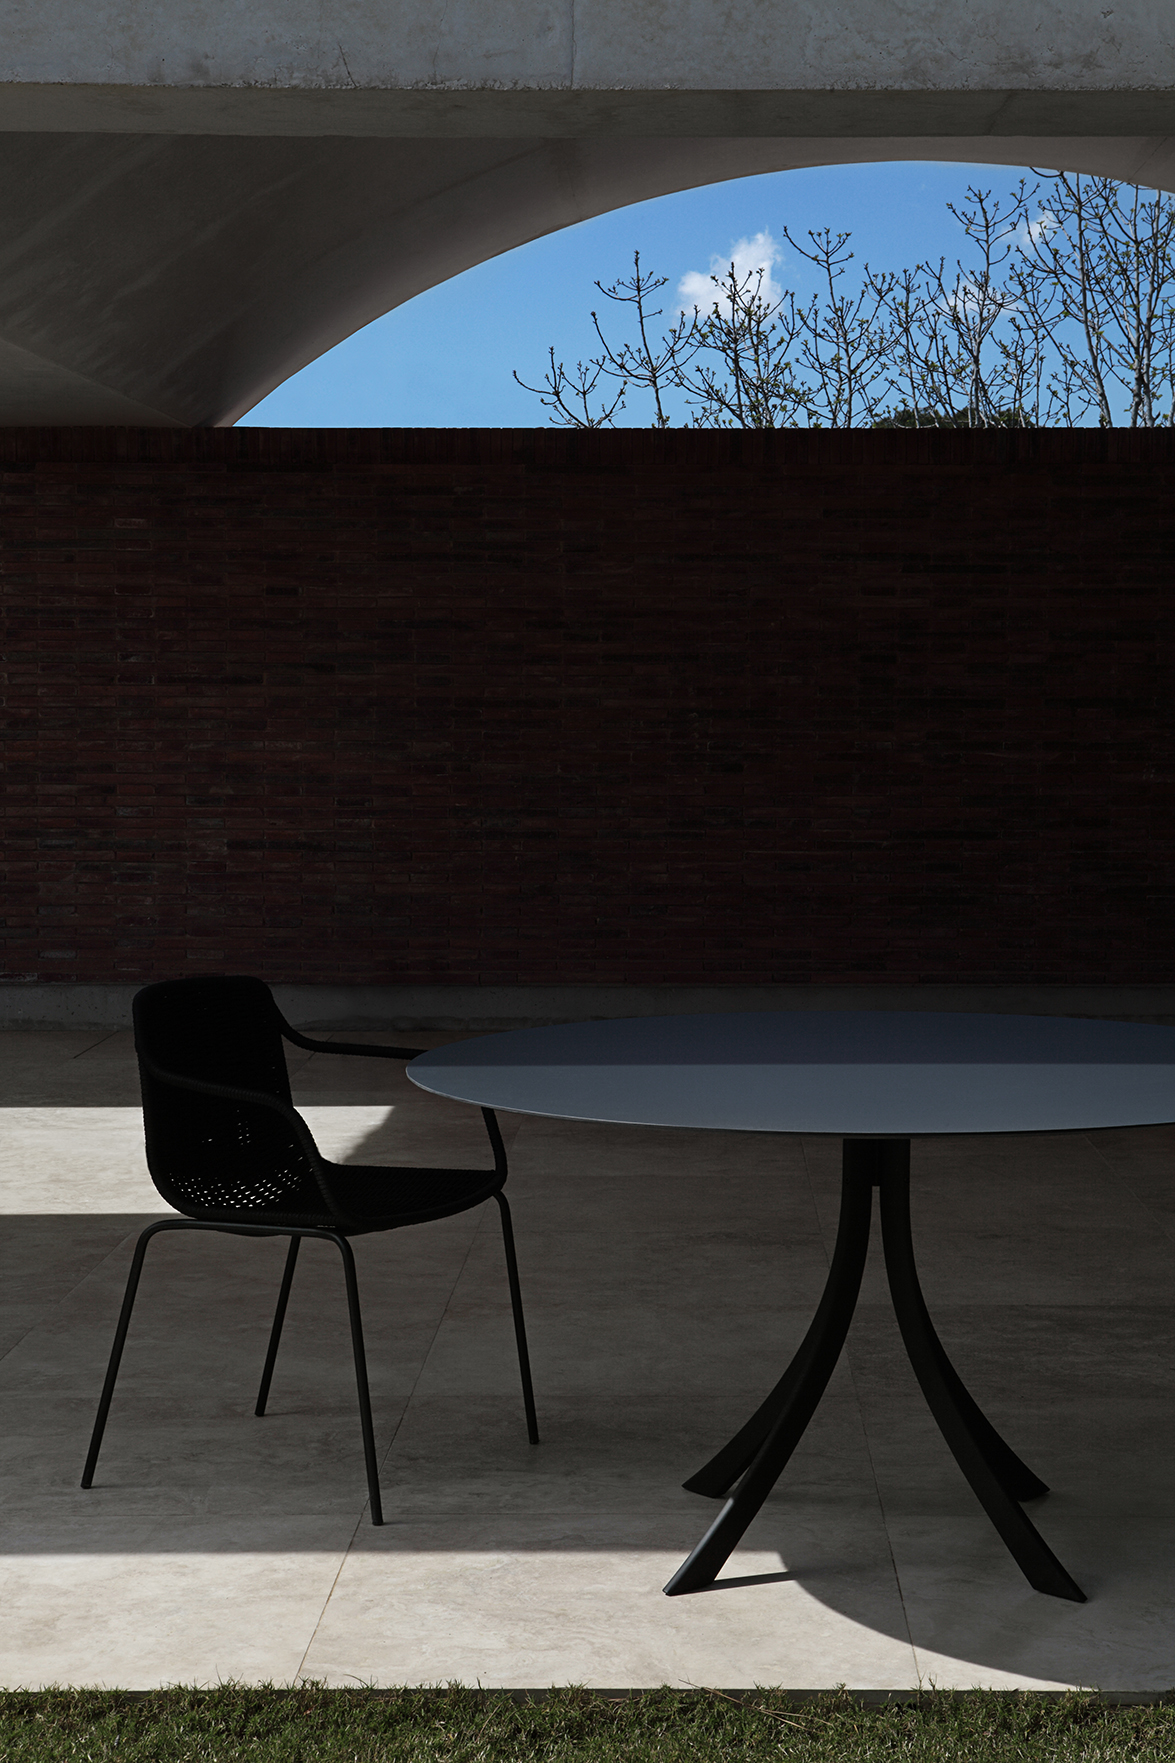 Falcata dining table by Lievore Altherr Molina 01